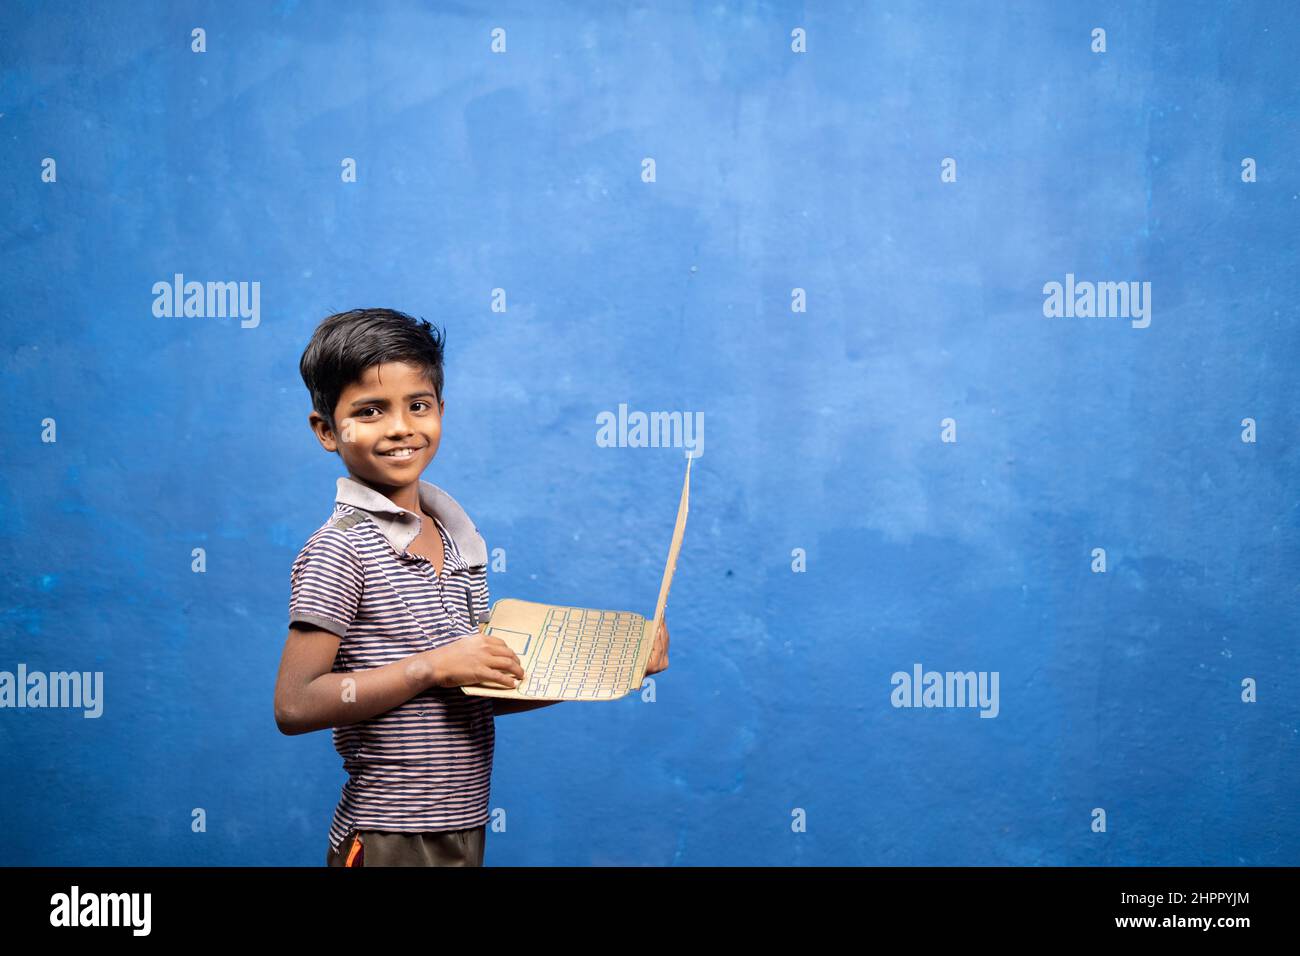 Smiling boy kid playing with cardboard laptop by looking at camera - concept of entertainment, childwood playful lifestyle and poverty Stock Photo